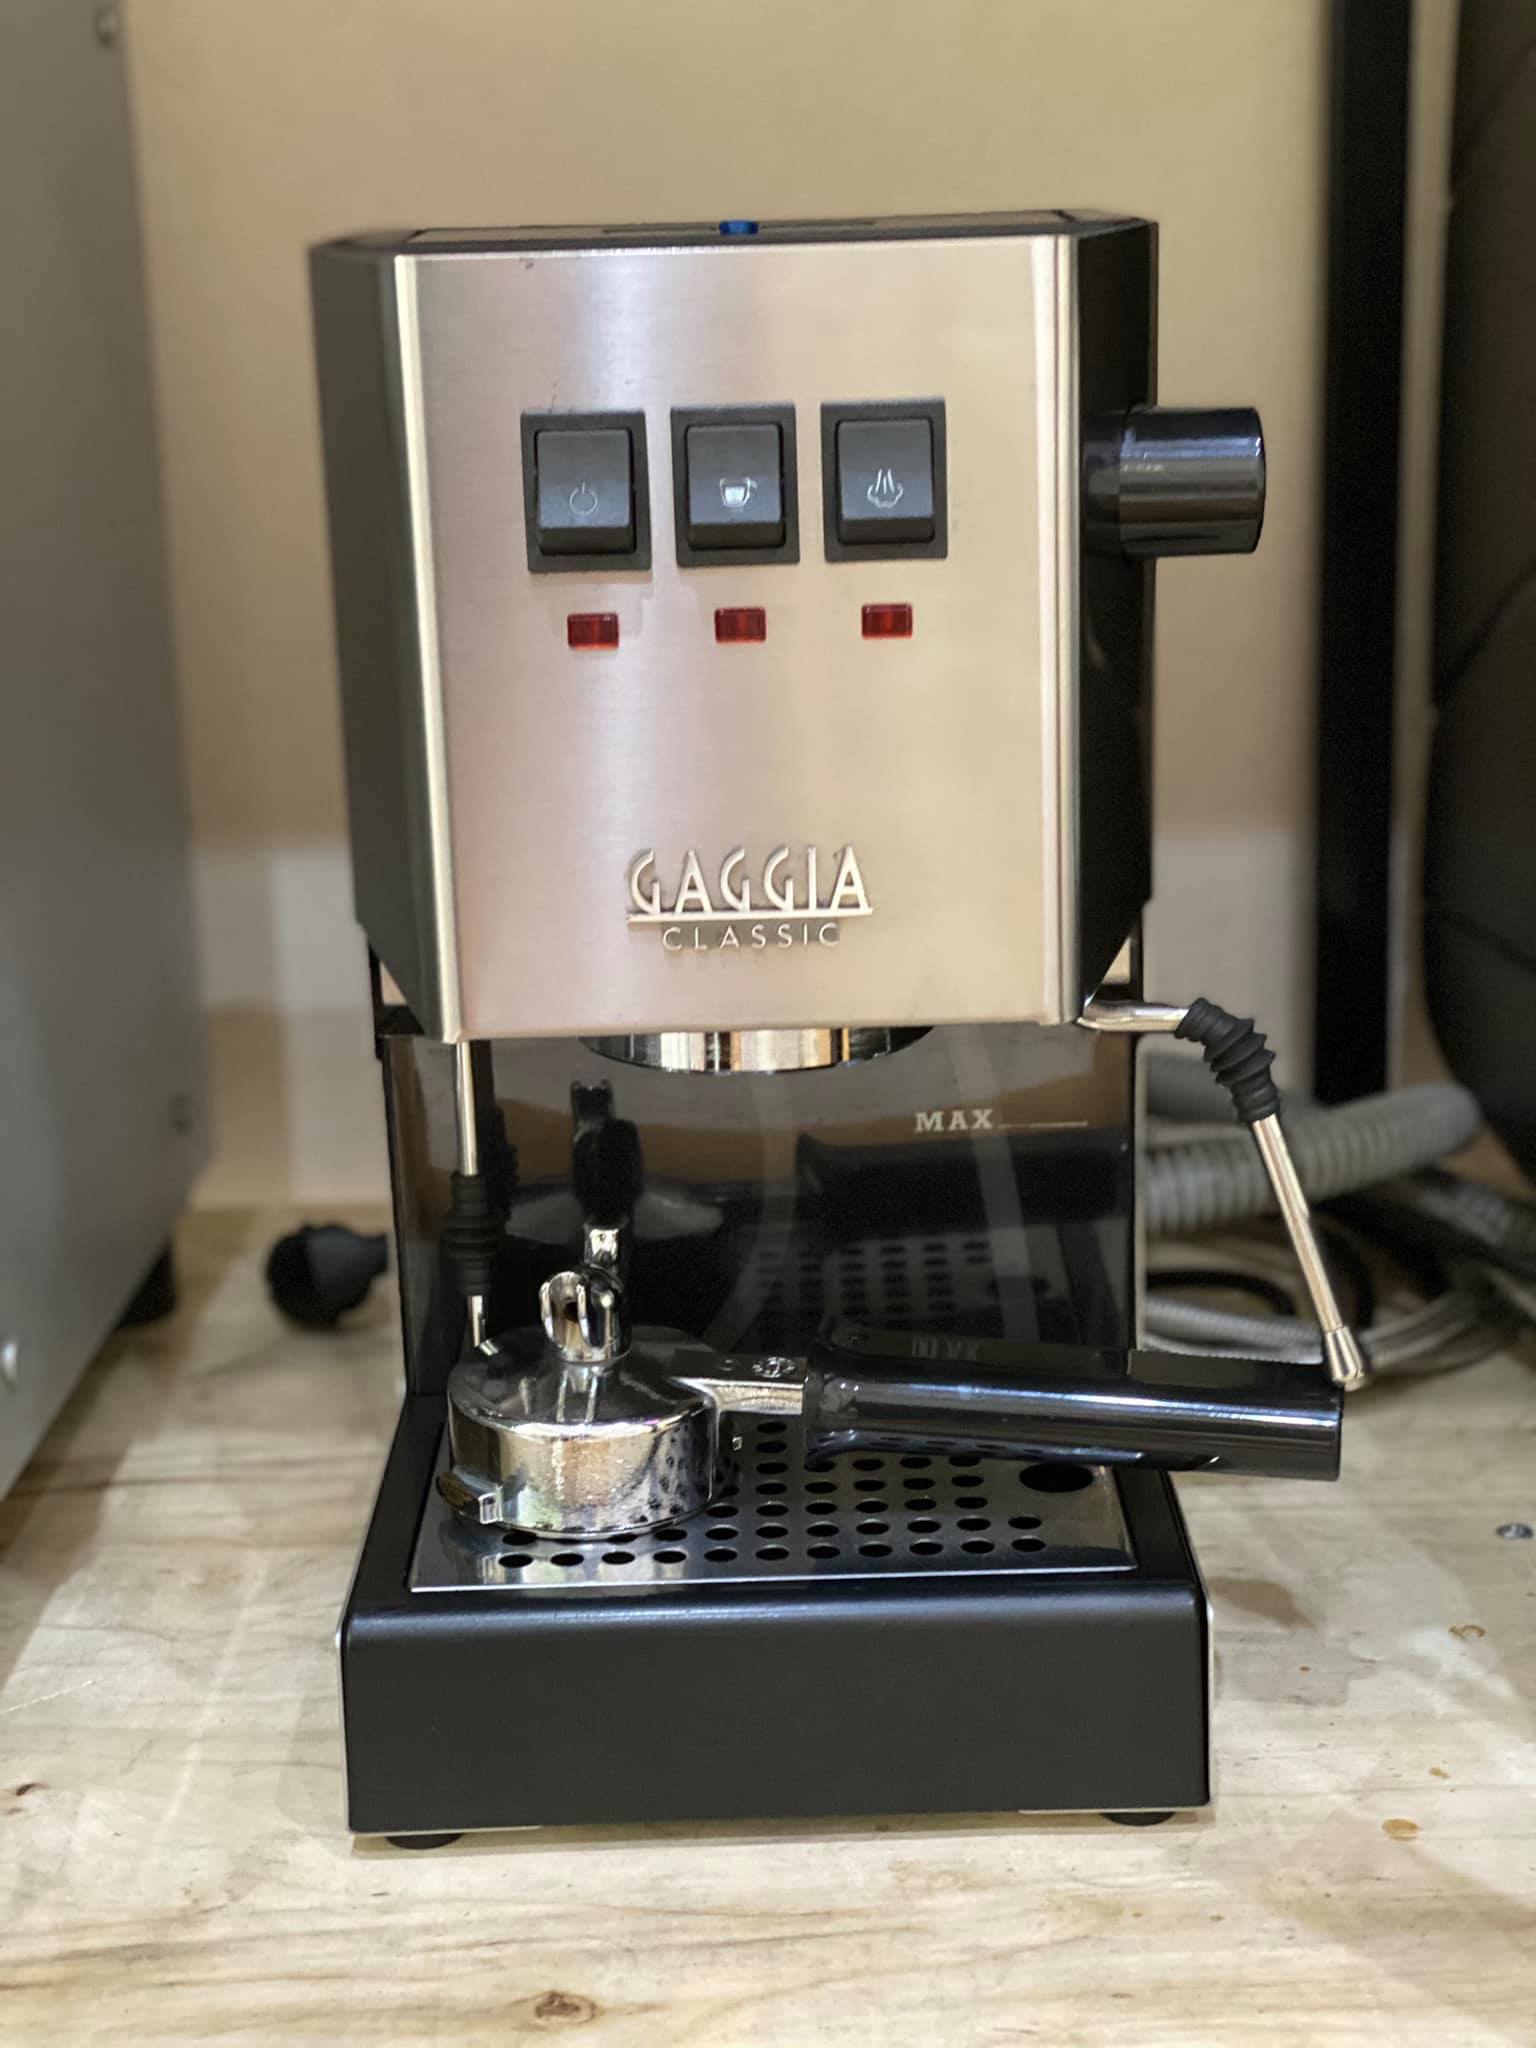 Gaggia Classic Pro has a frontal water tank